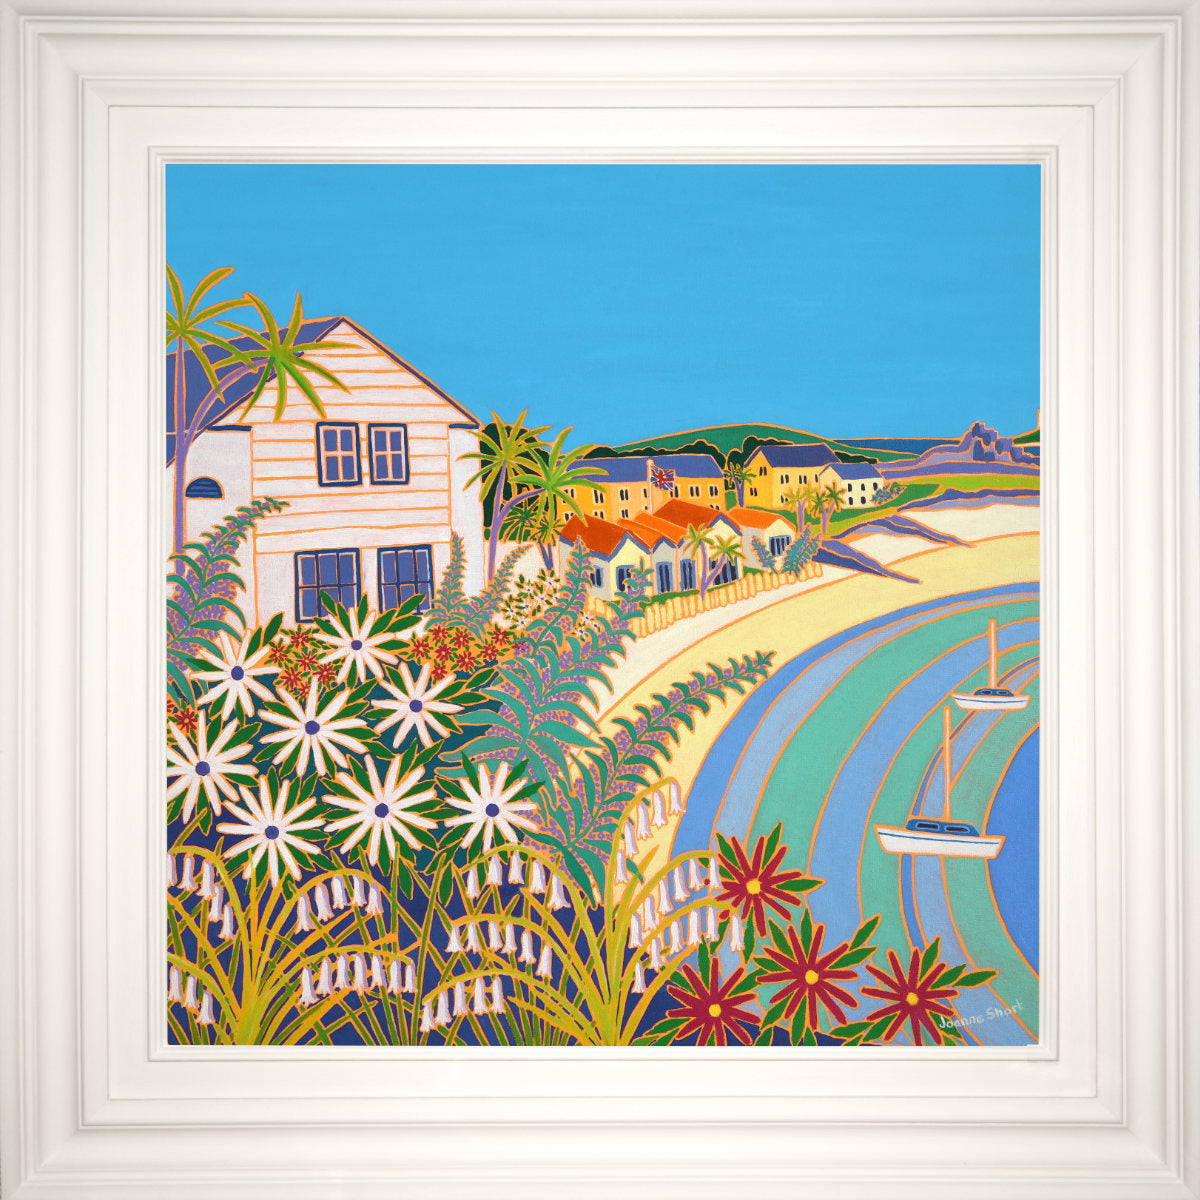 &#39;Beachside Cottage Gardens, Old Grimsby, Tresco’. 24x24 inches oil on canvas. Paintings of Cornwall by Cornish Artist Joanne Short from our Cornwall Art Gallery